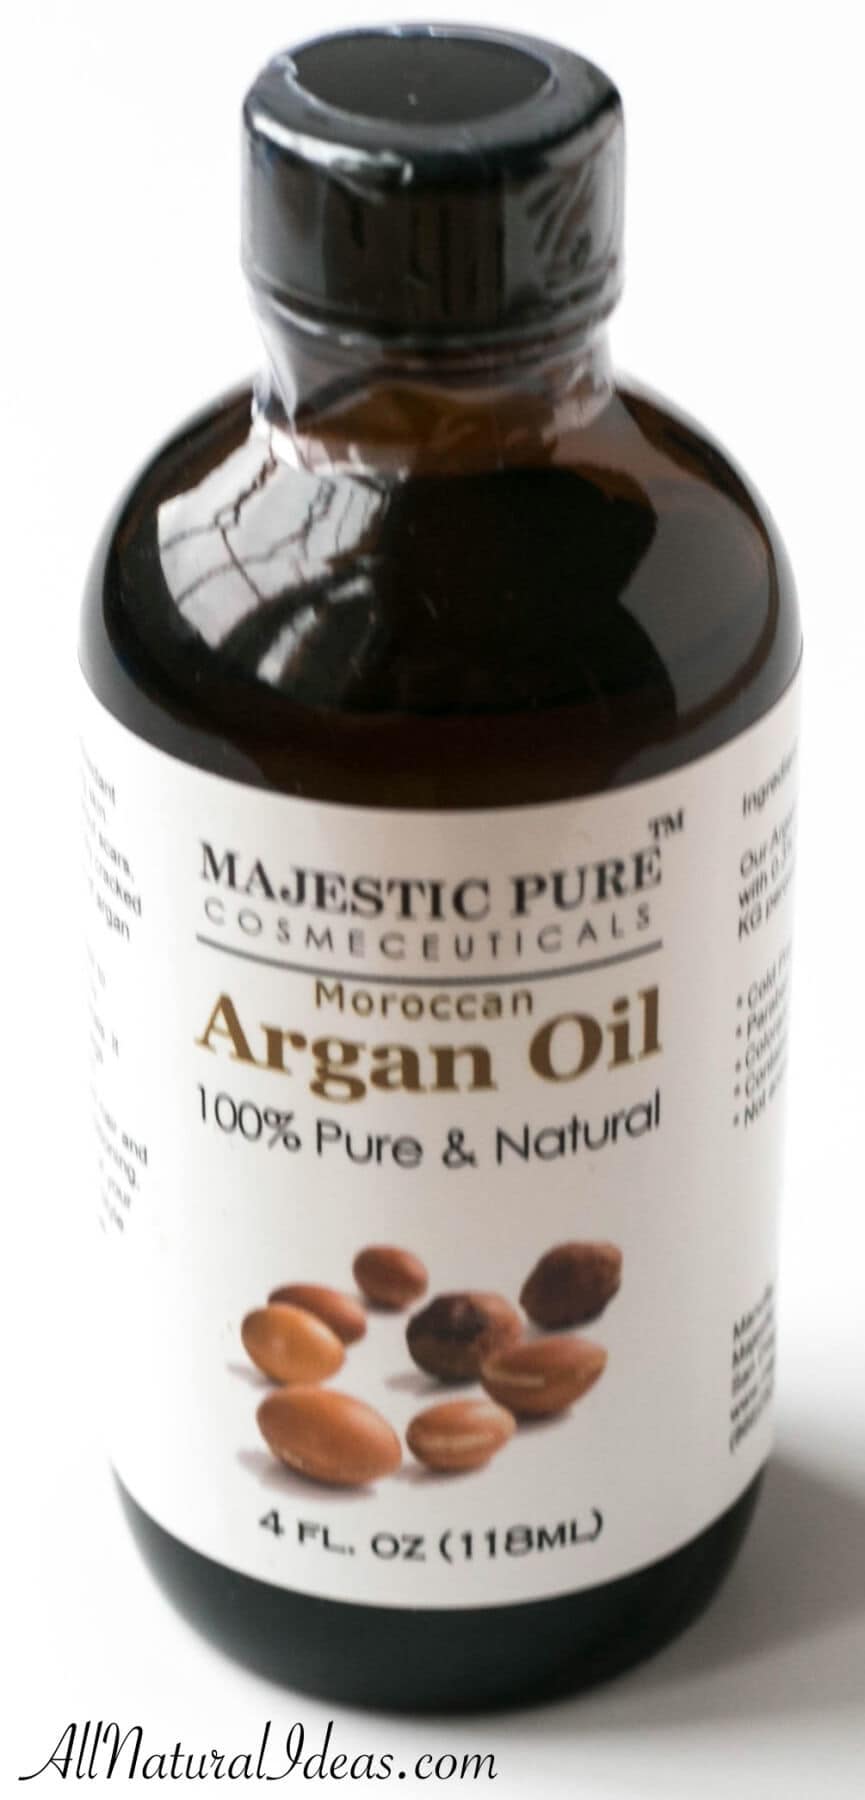 It's becoming popular to use argan oil for skin and hair worldwide. Regular use of argan oil is sure to make your skin and hair more youthful and healthier.